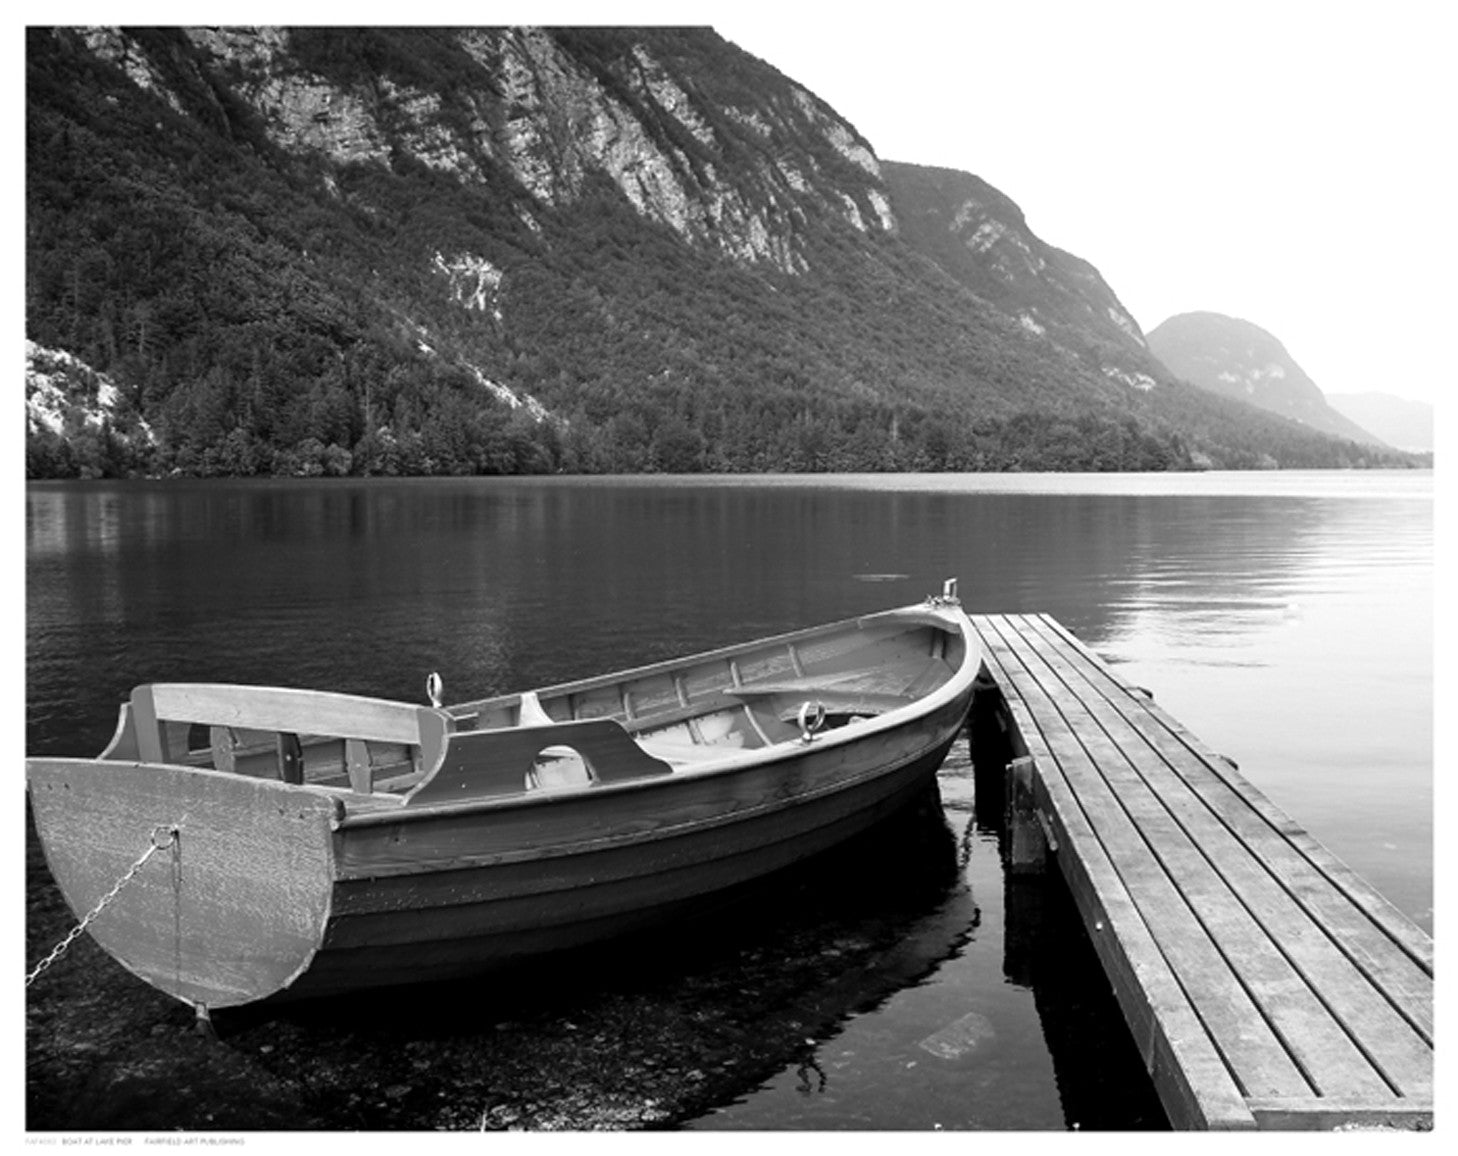 Boat at Lake Pier by Anon - FairField Art Publishing